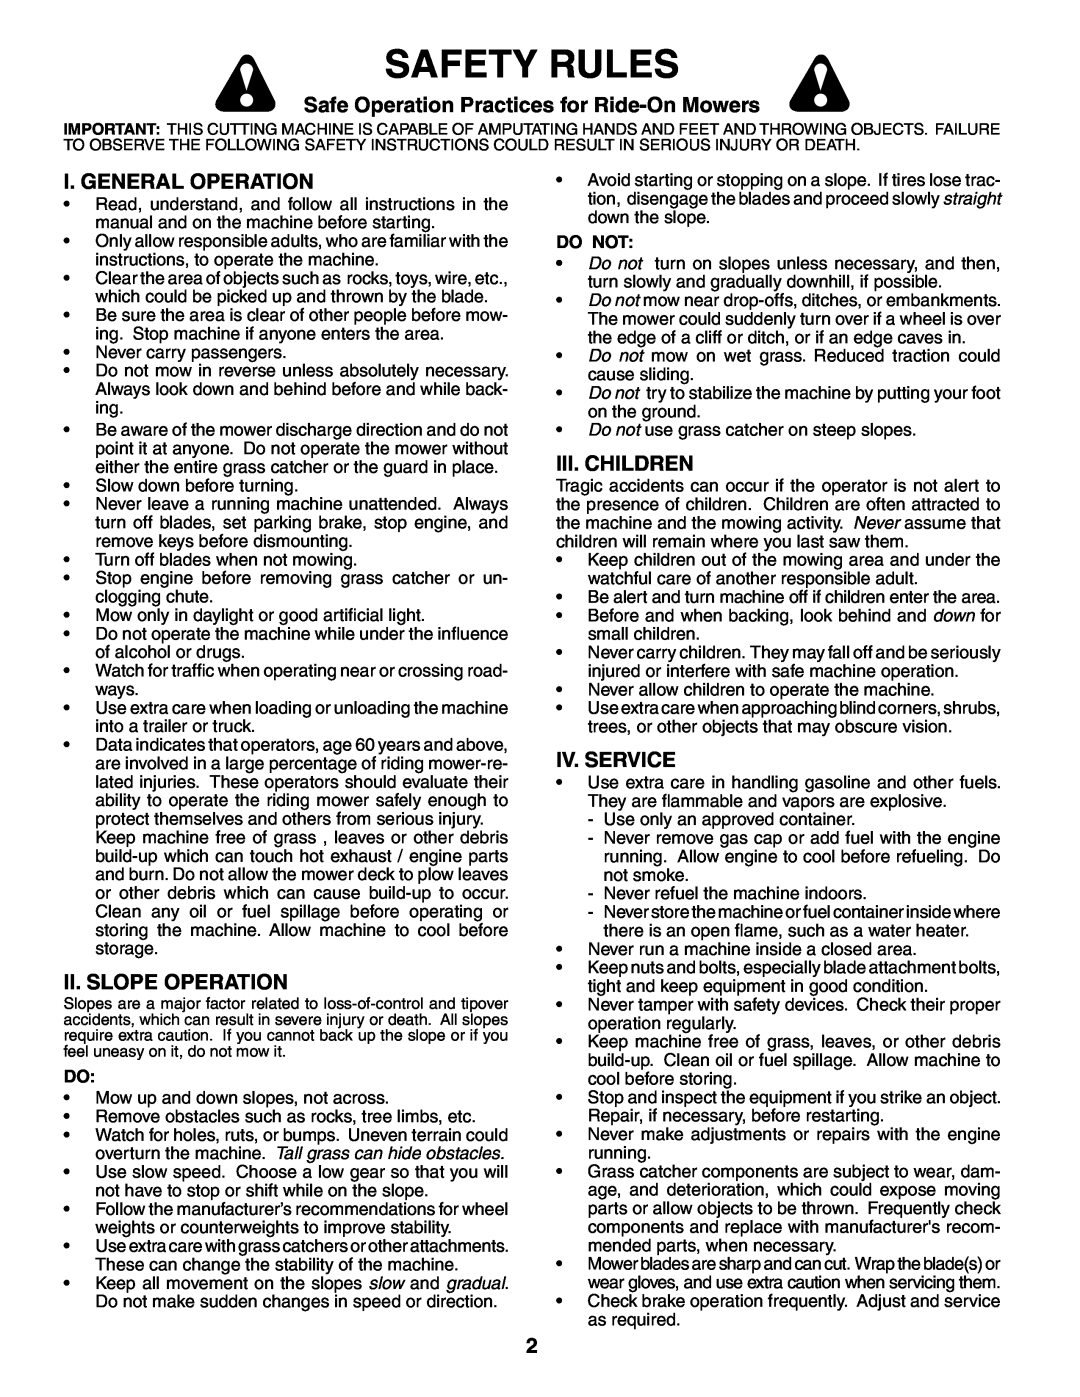 Weed Eater 187637 Safety Rules, Safe Operation Practices for Ride-On Mowers, I. General Operation, Ii. Slope Operation 